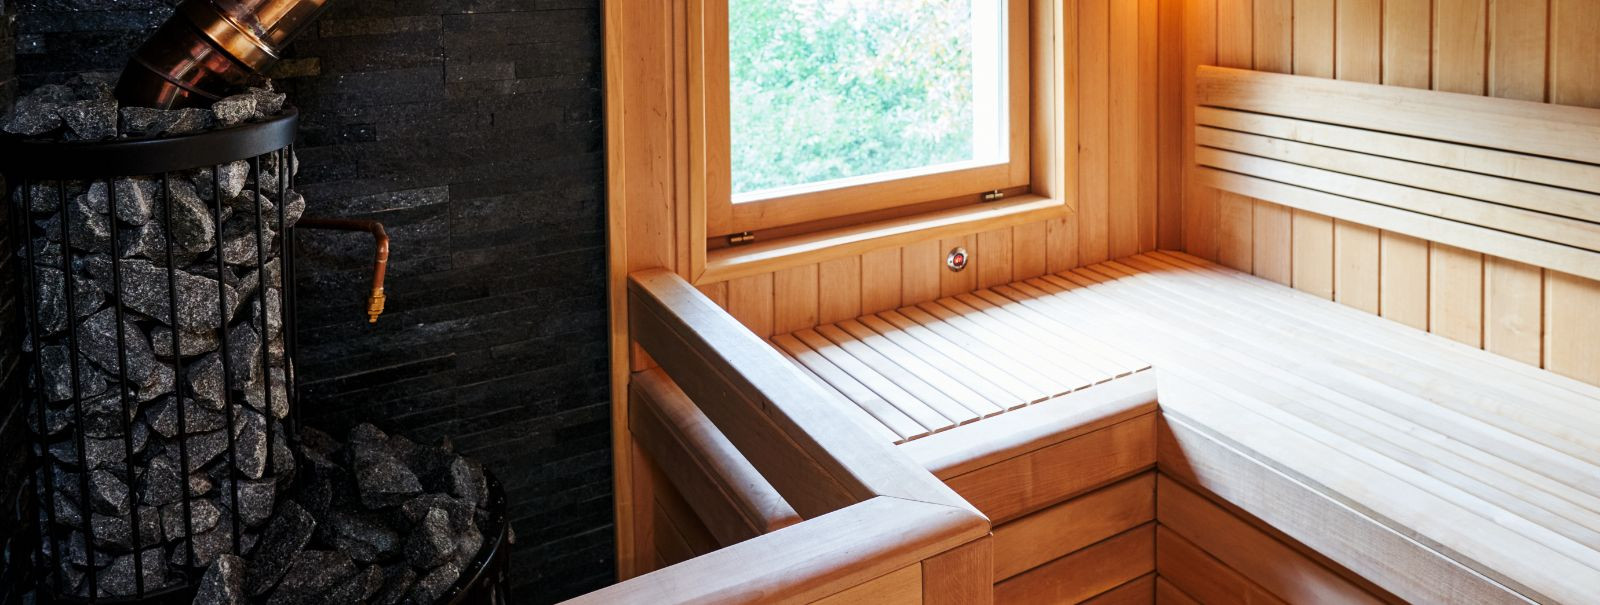 Imagine a personal oasis of relaxation and health benefits right in your own home. A home sauna can provide just that, offering a serene retreat and a multitude